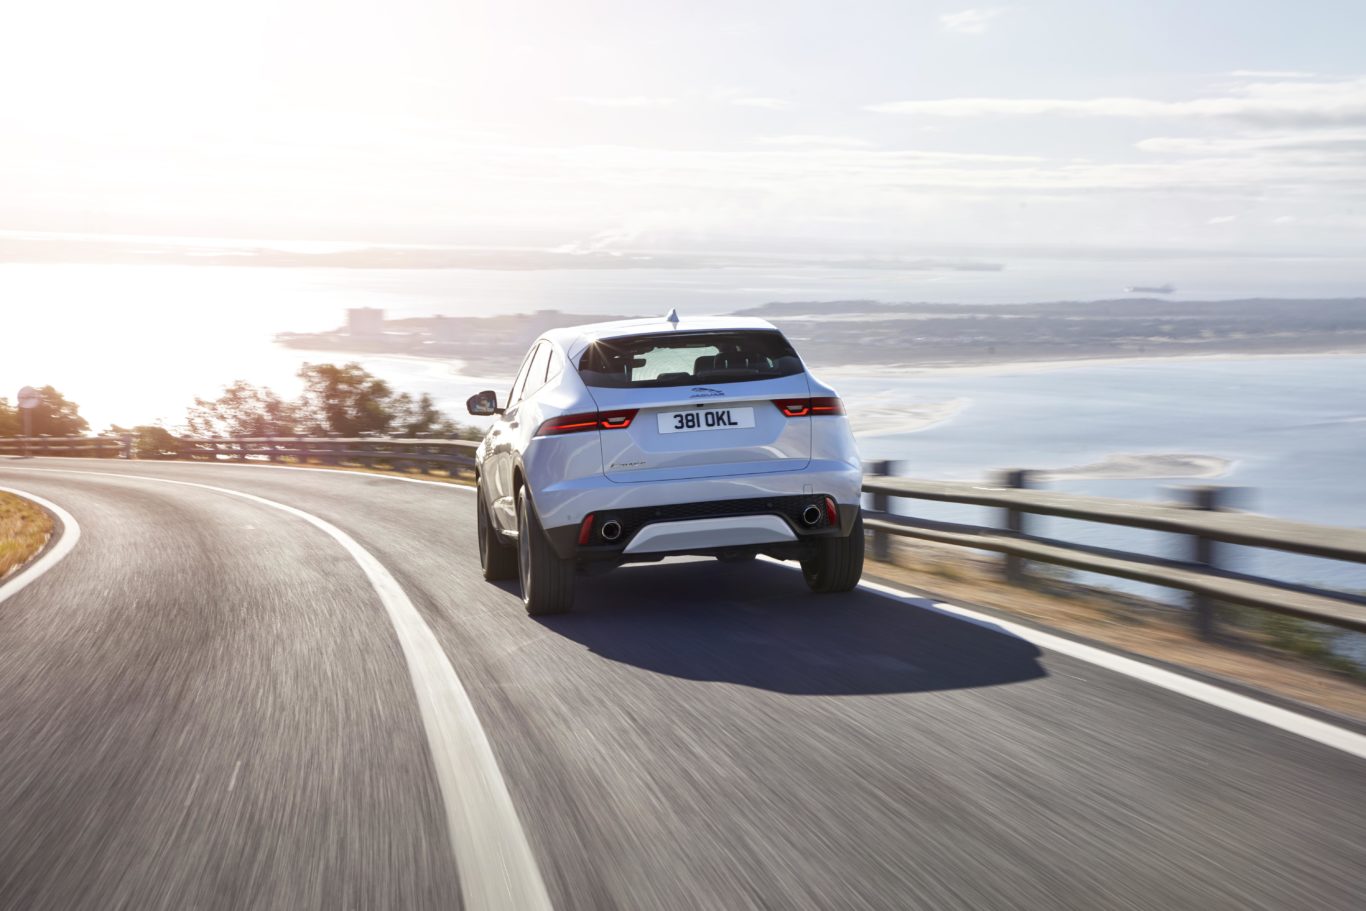 Compact proportions make the E-Pace easy to place on the road